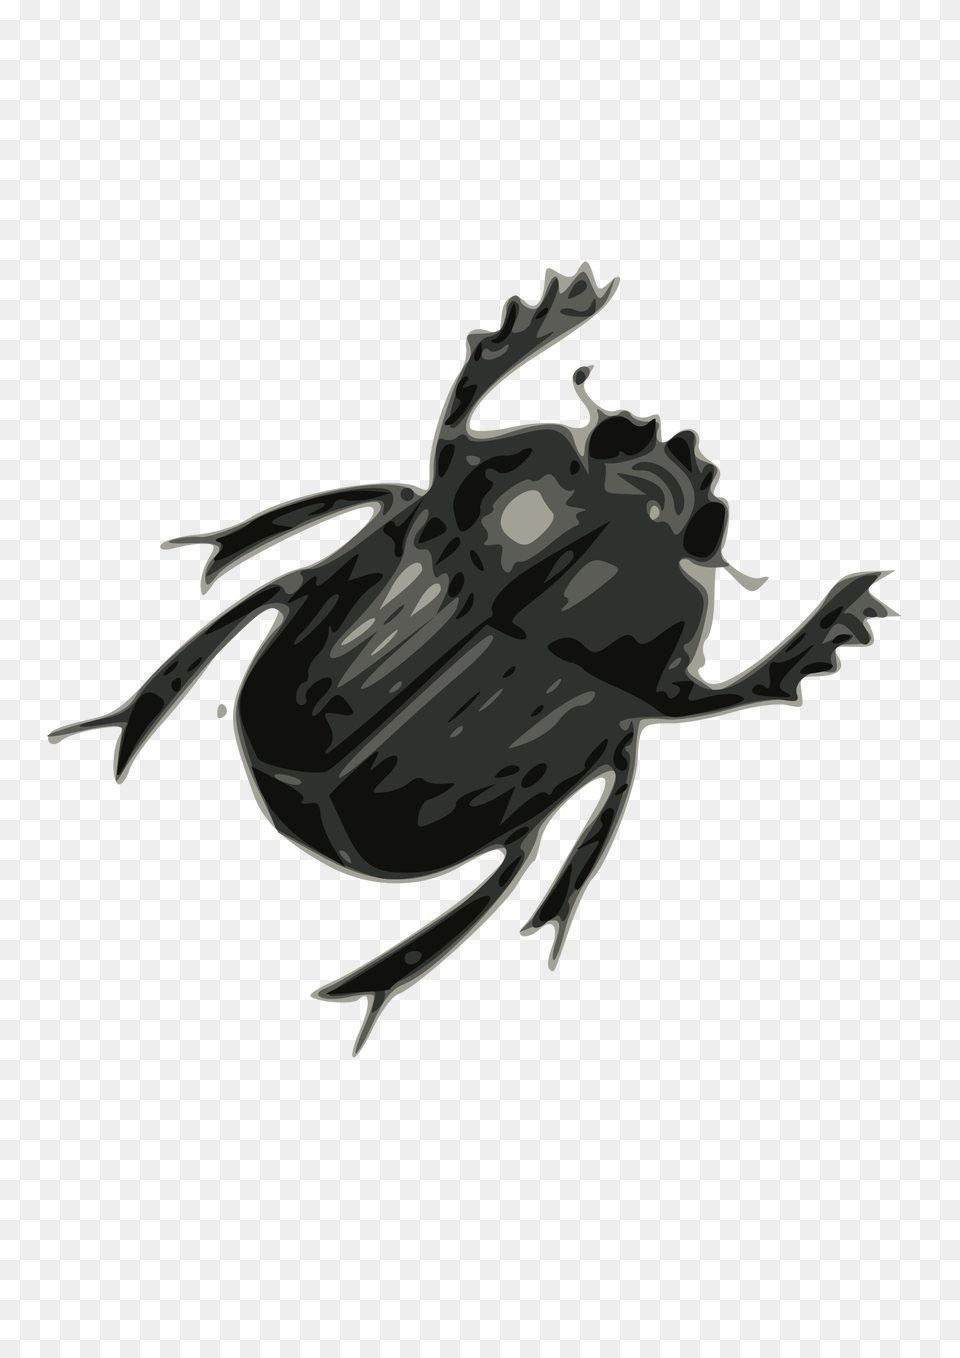 Bug, Animal, Dung Beetle, Insect, Invertebrate Png Image